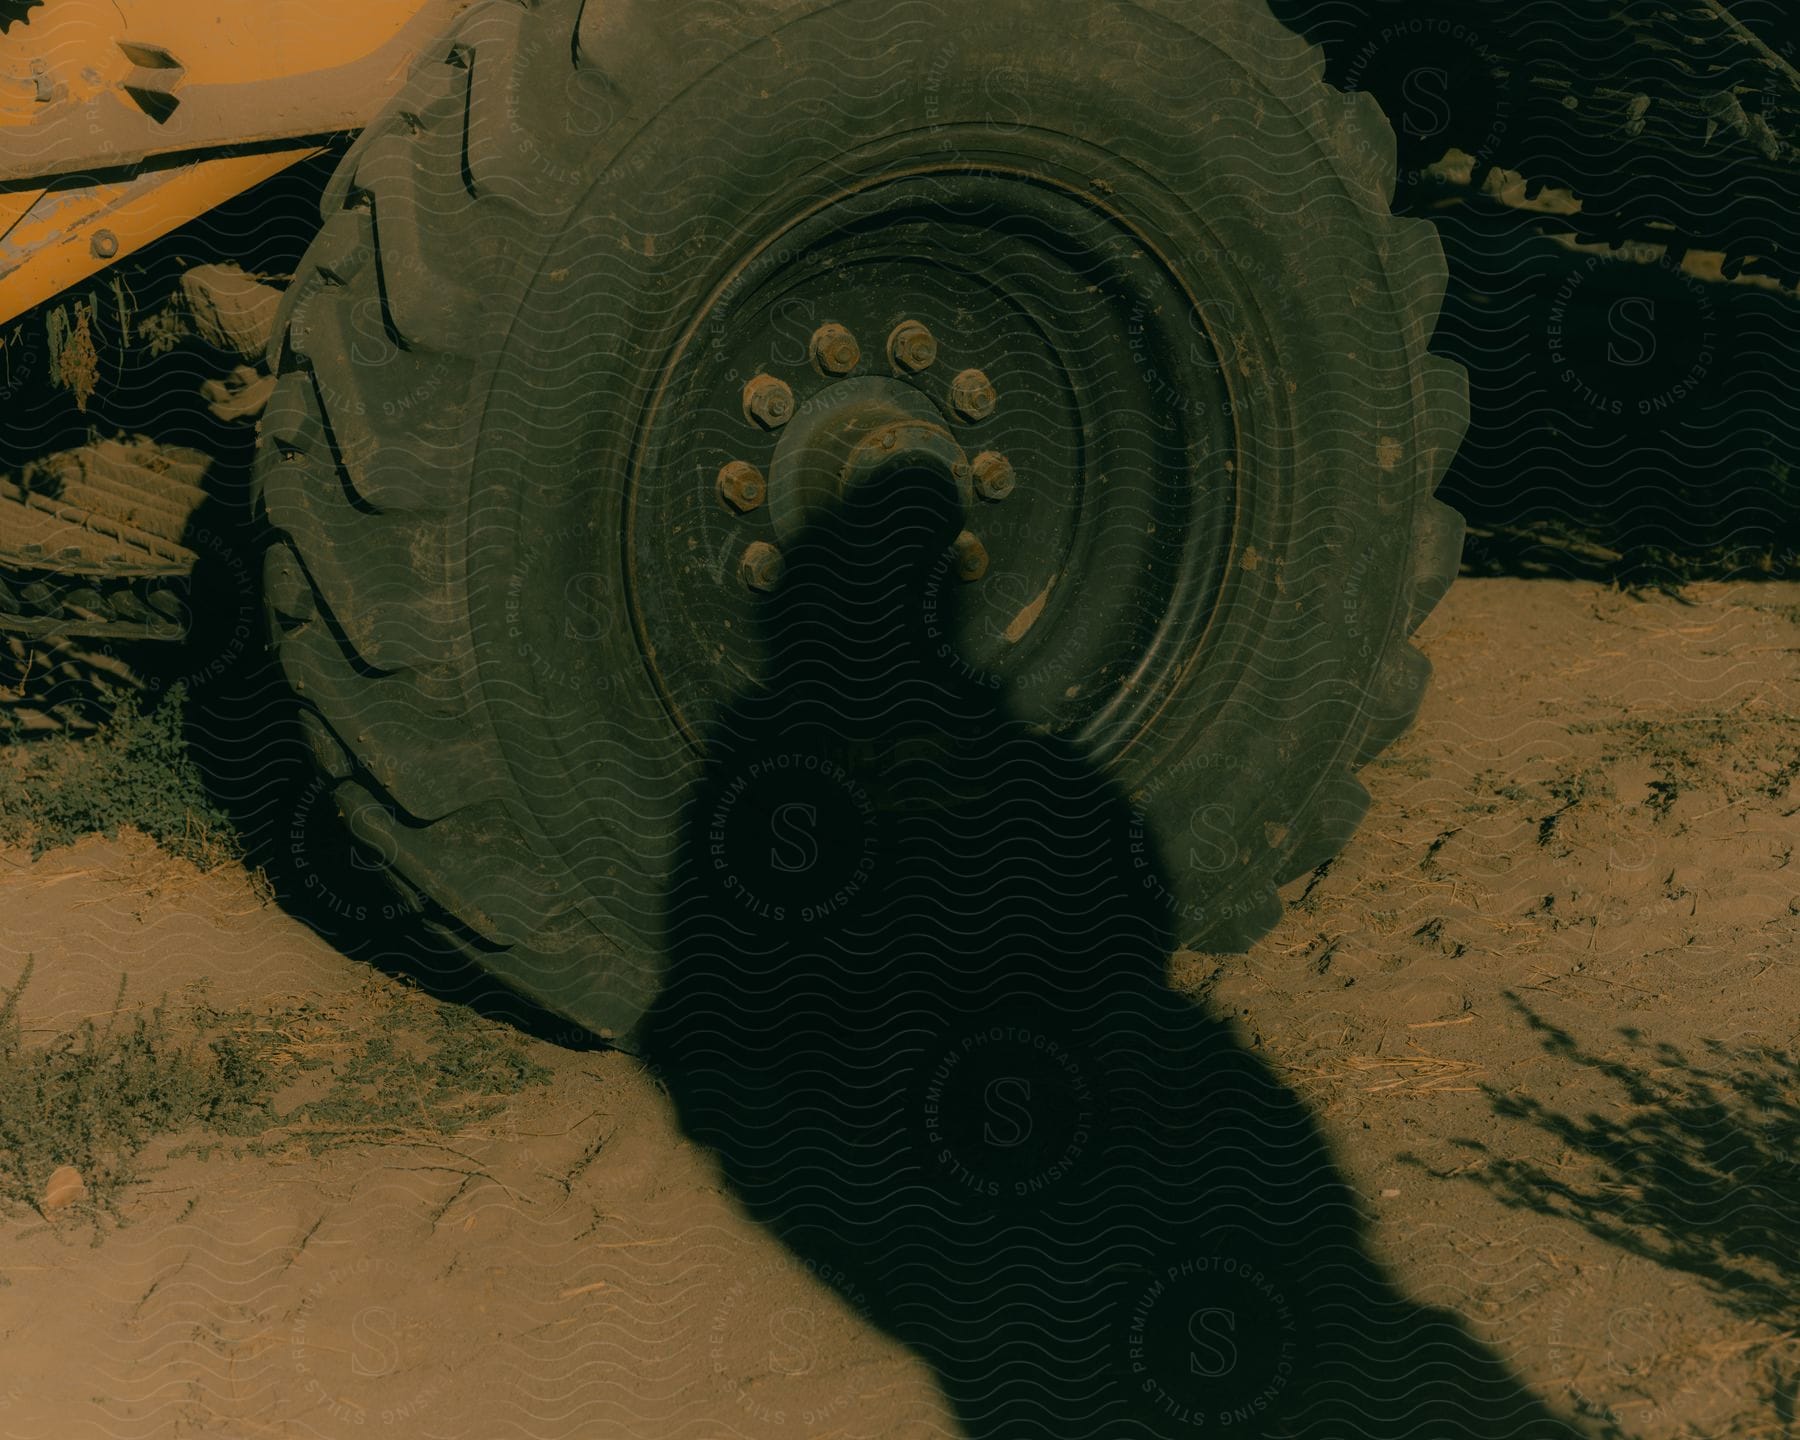 A person's shadow falling on a tractor's tire.